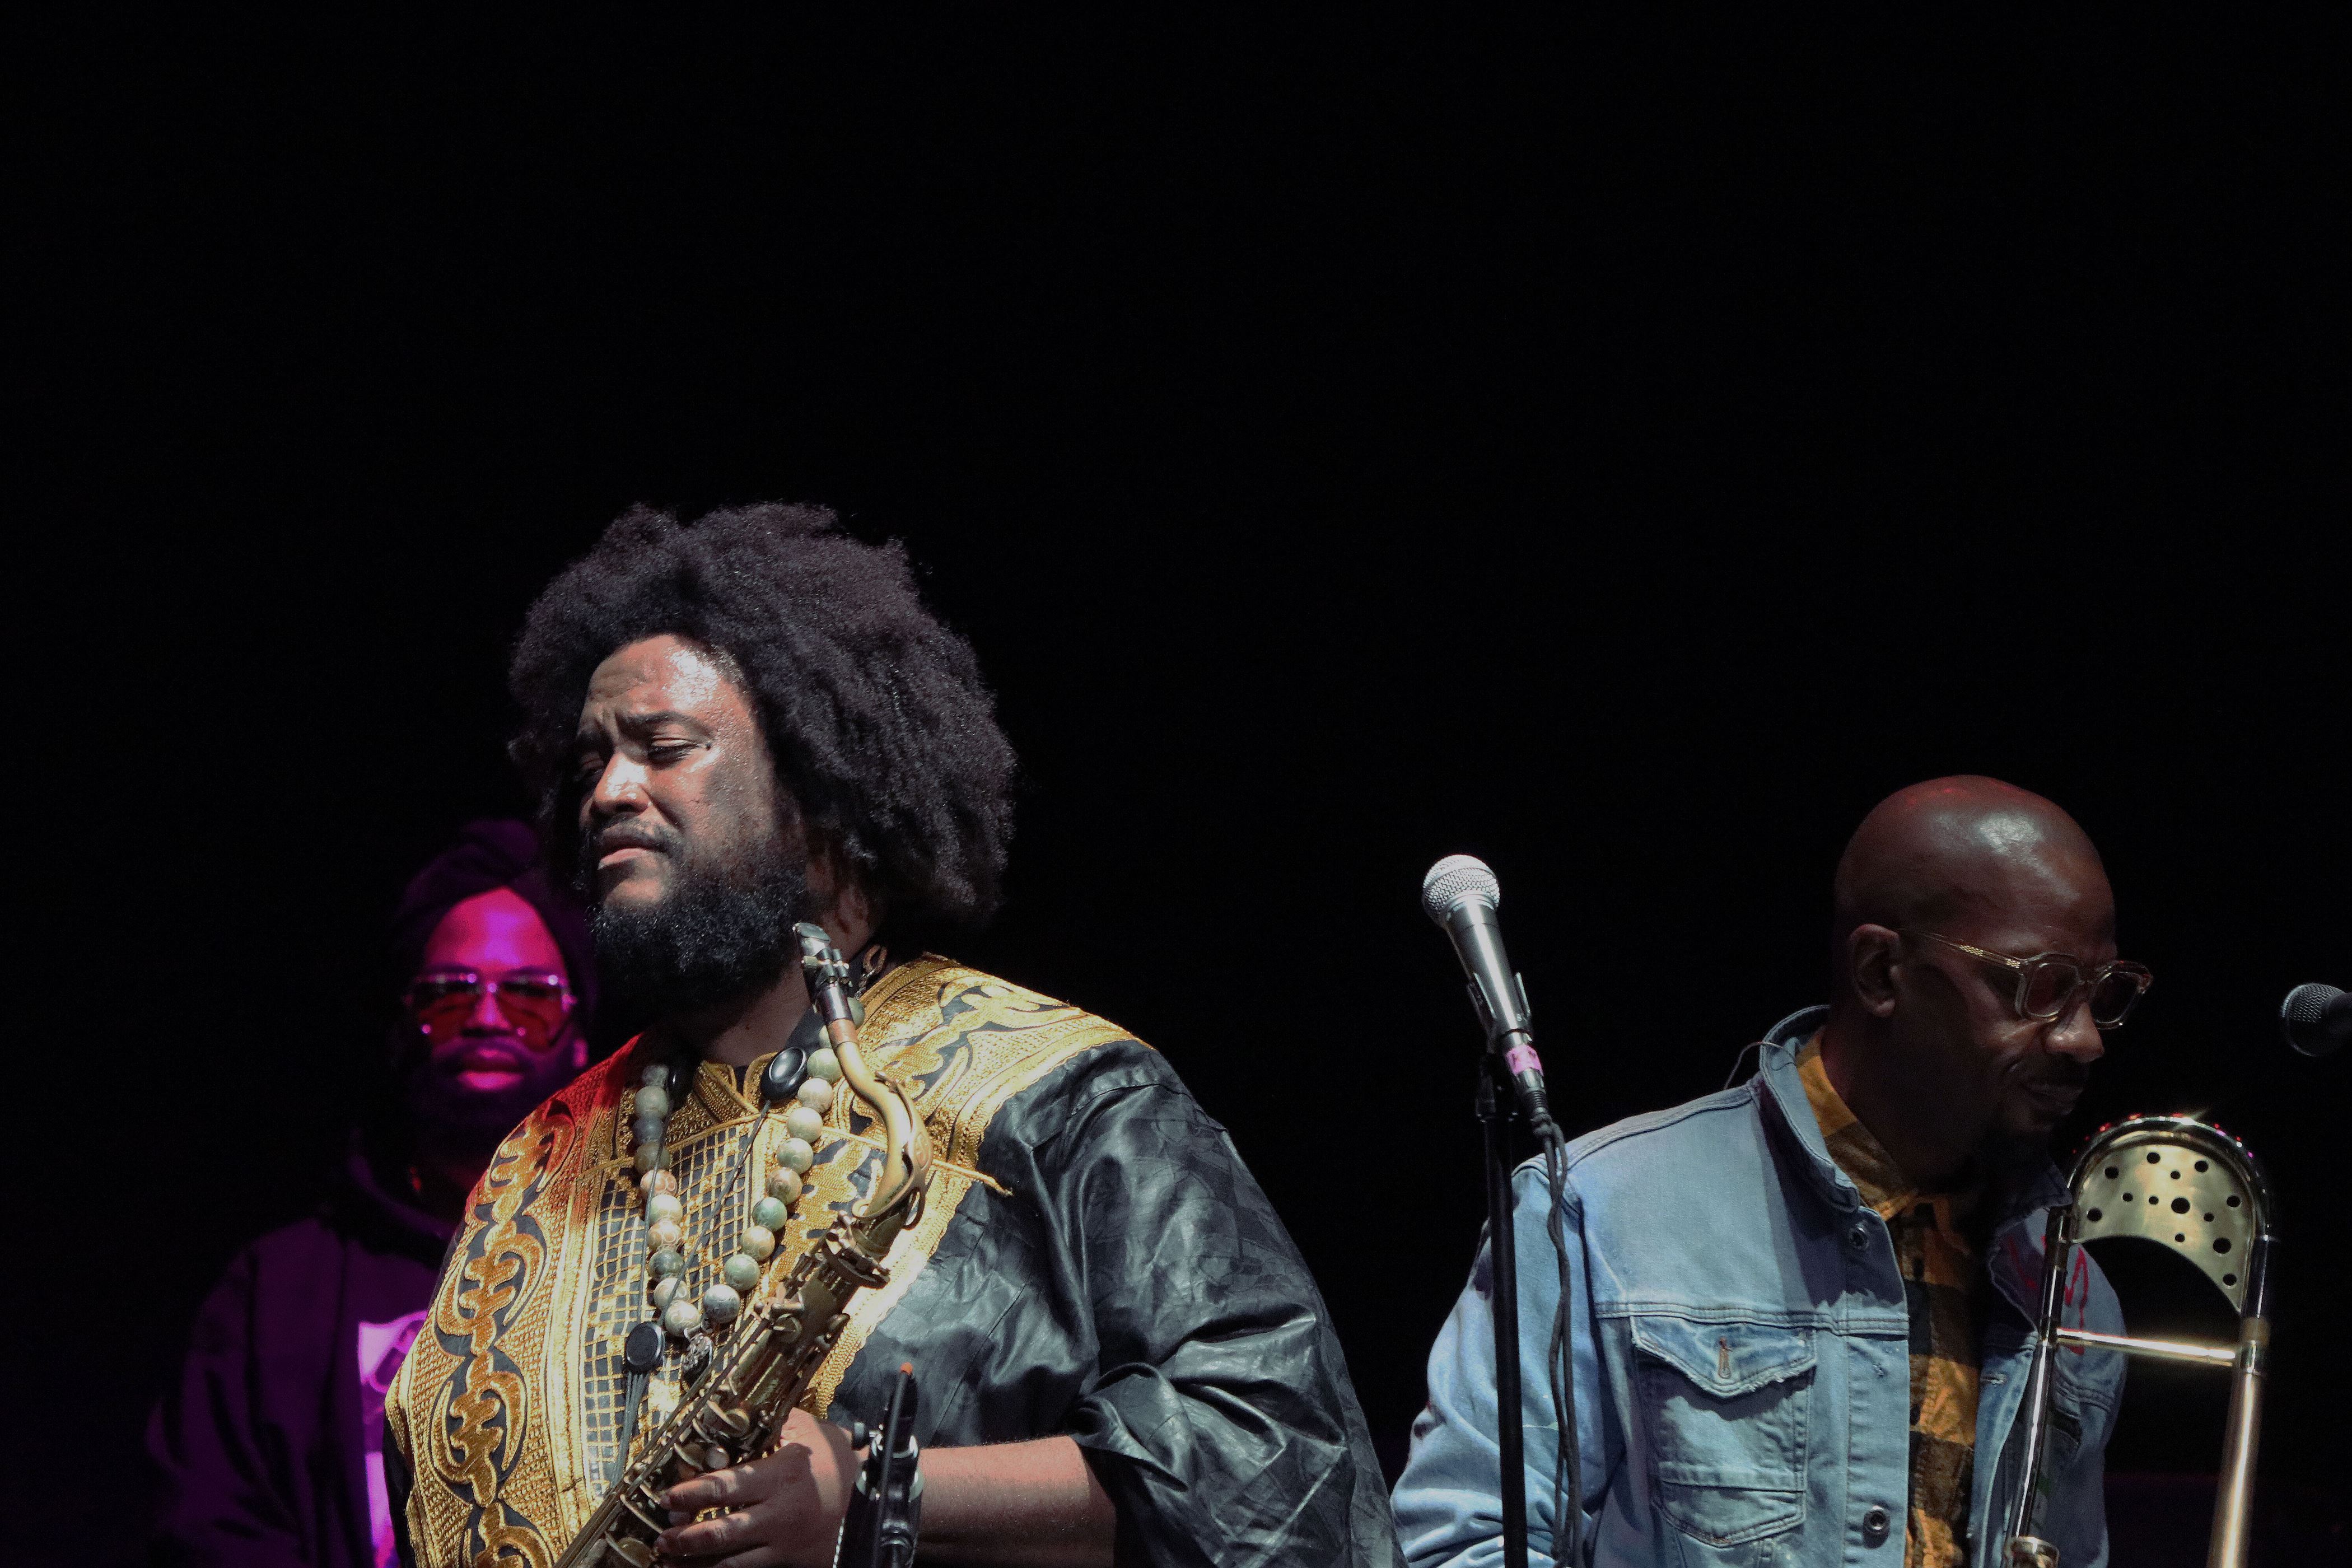 Kamasi Washington and trombonist Ryan Porter between solos with DJ Battlecat in the background. Photo courtesy of Julian Rigg